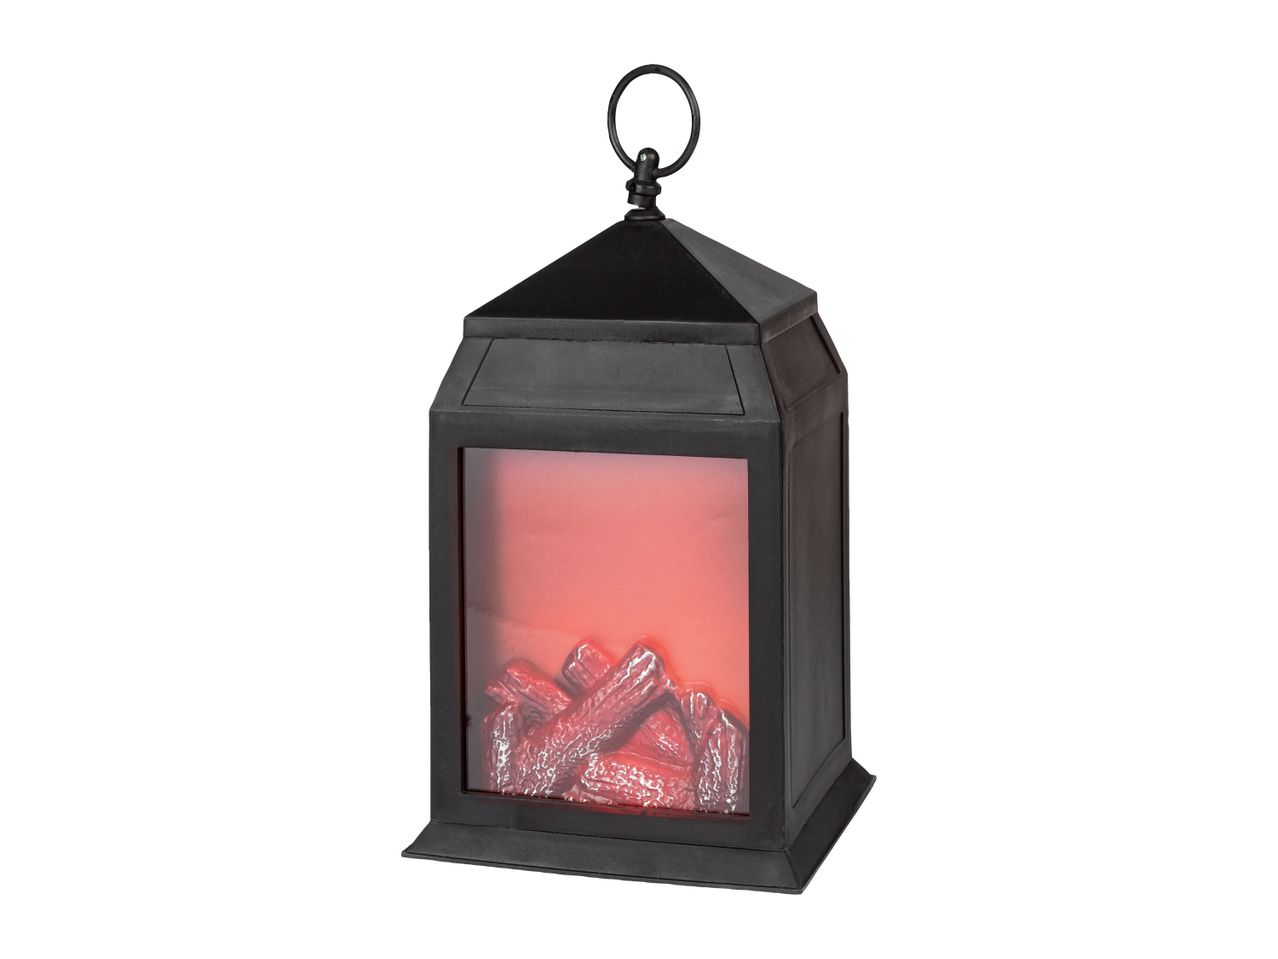 Go to full screen view: Livarno Home Battery Operated LED Fireplace Style Lantern - Image 4